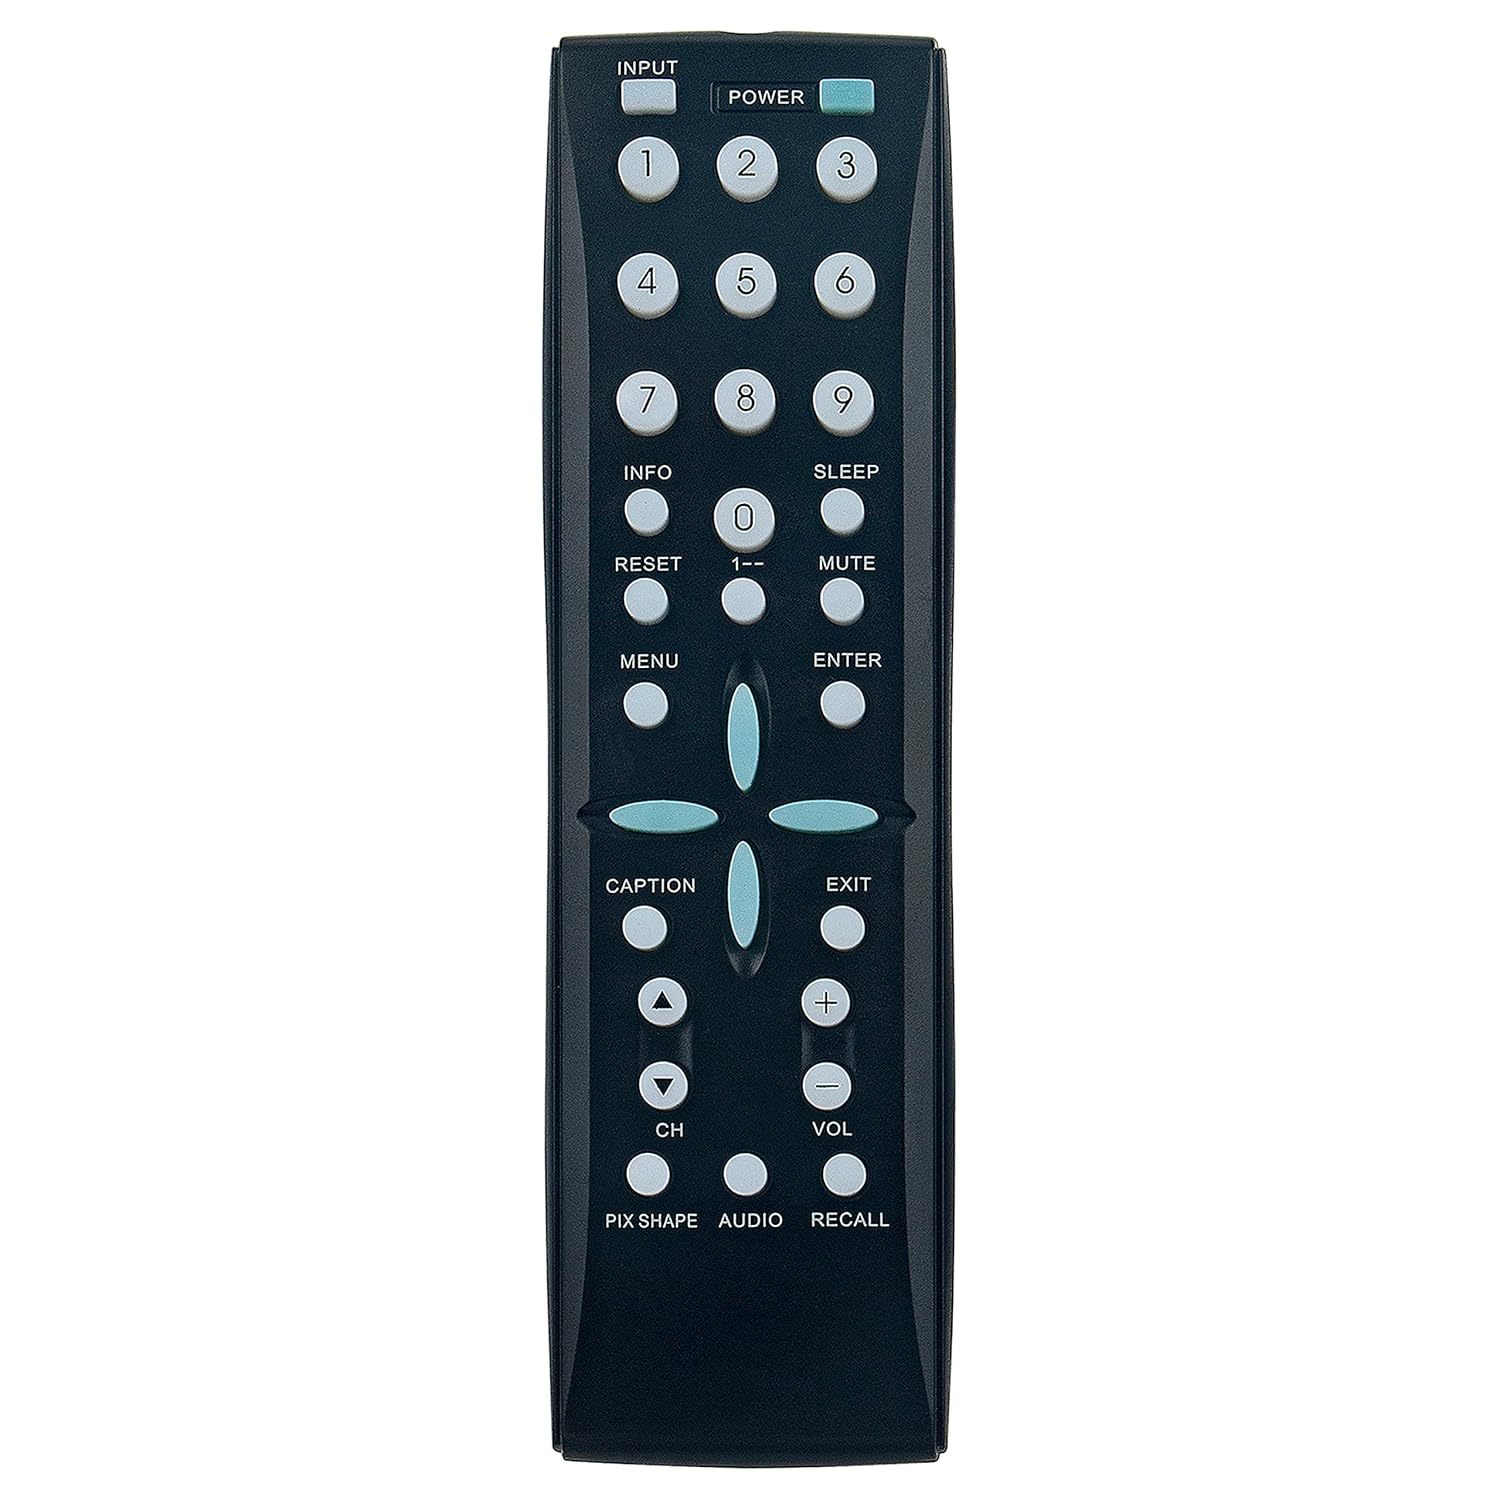 GXBG GXBJ Replace Remote Control fit for Sanyo LCD TV DP26647 DP32647 DP37647 DP - $16.99